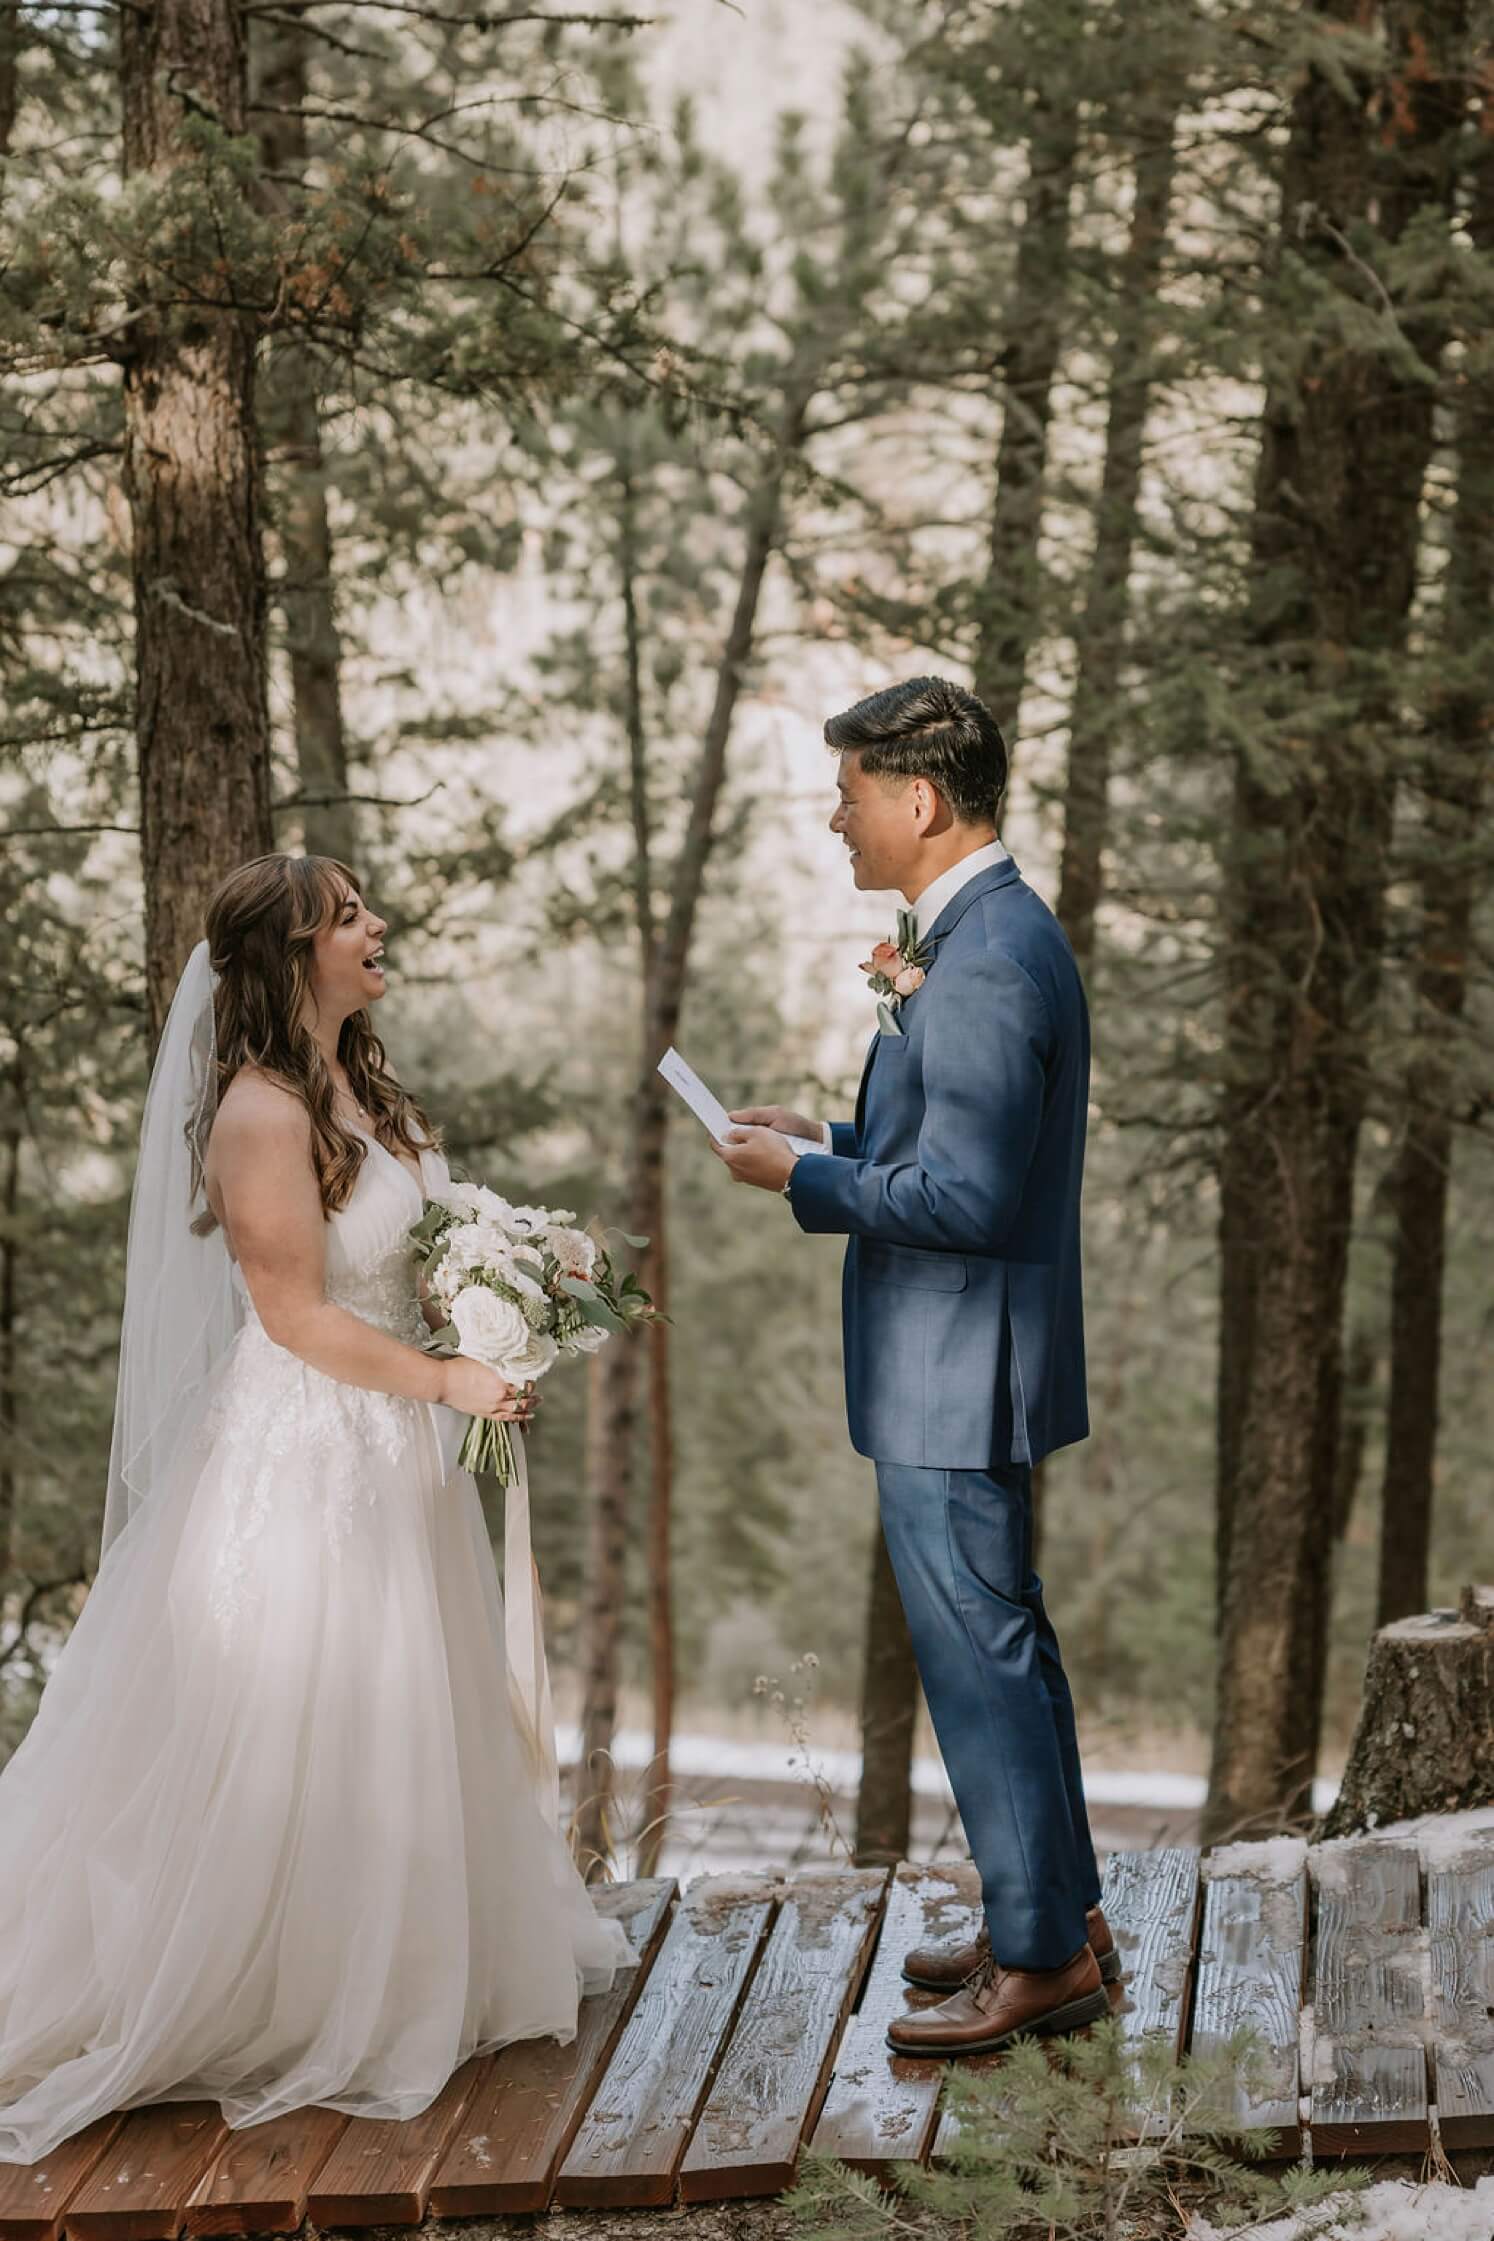 Groom reading vows to bride while they laugh during Colorado elopement at Juniper Mountain House | McArthur Weddings and Events